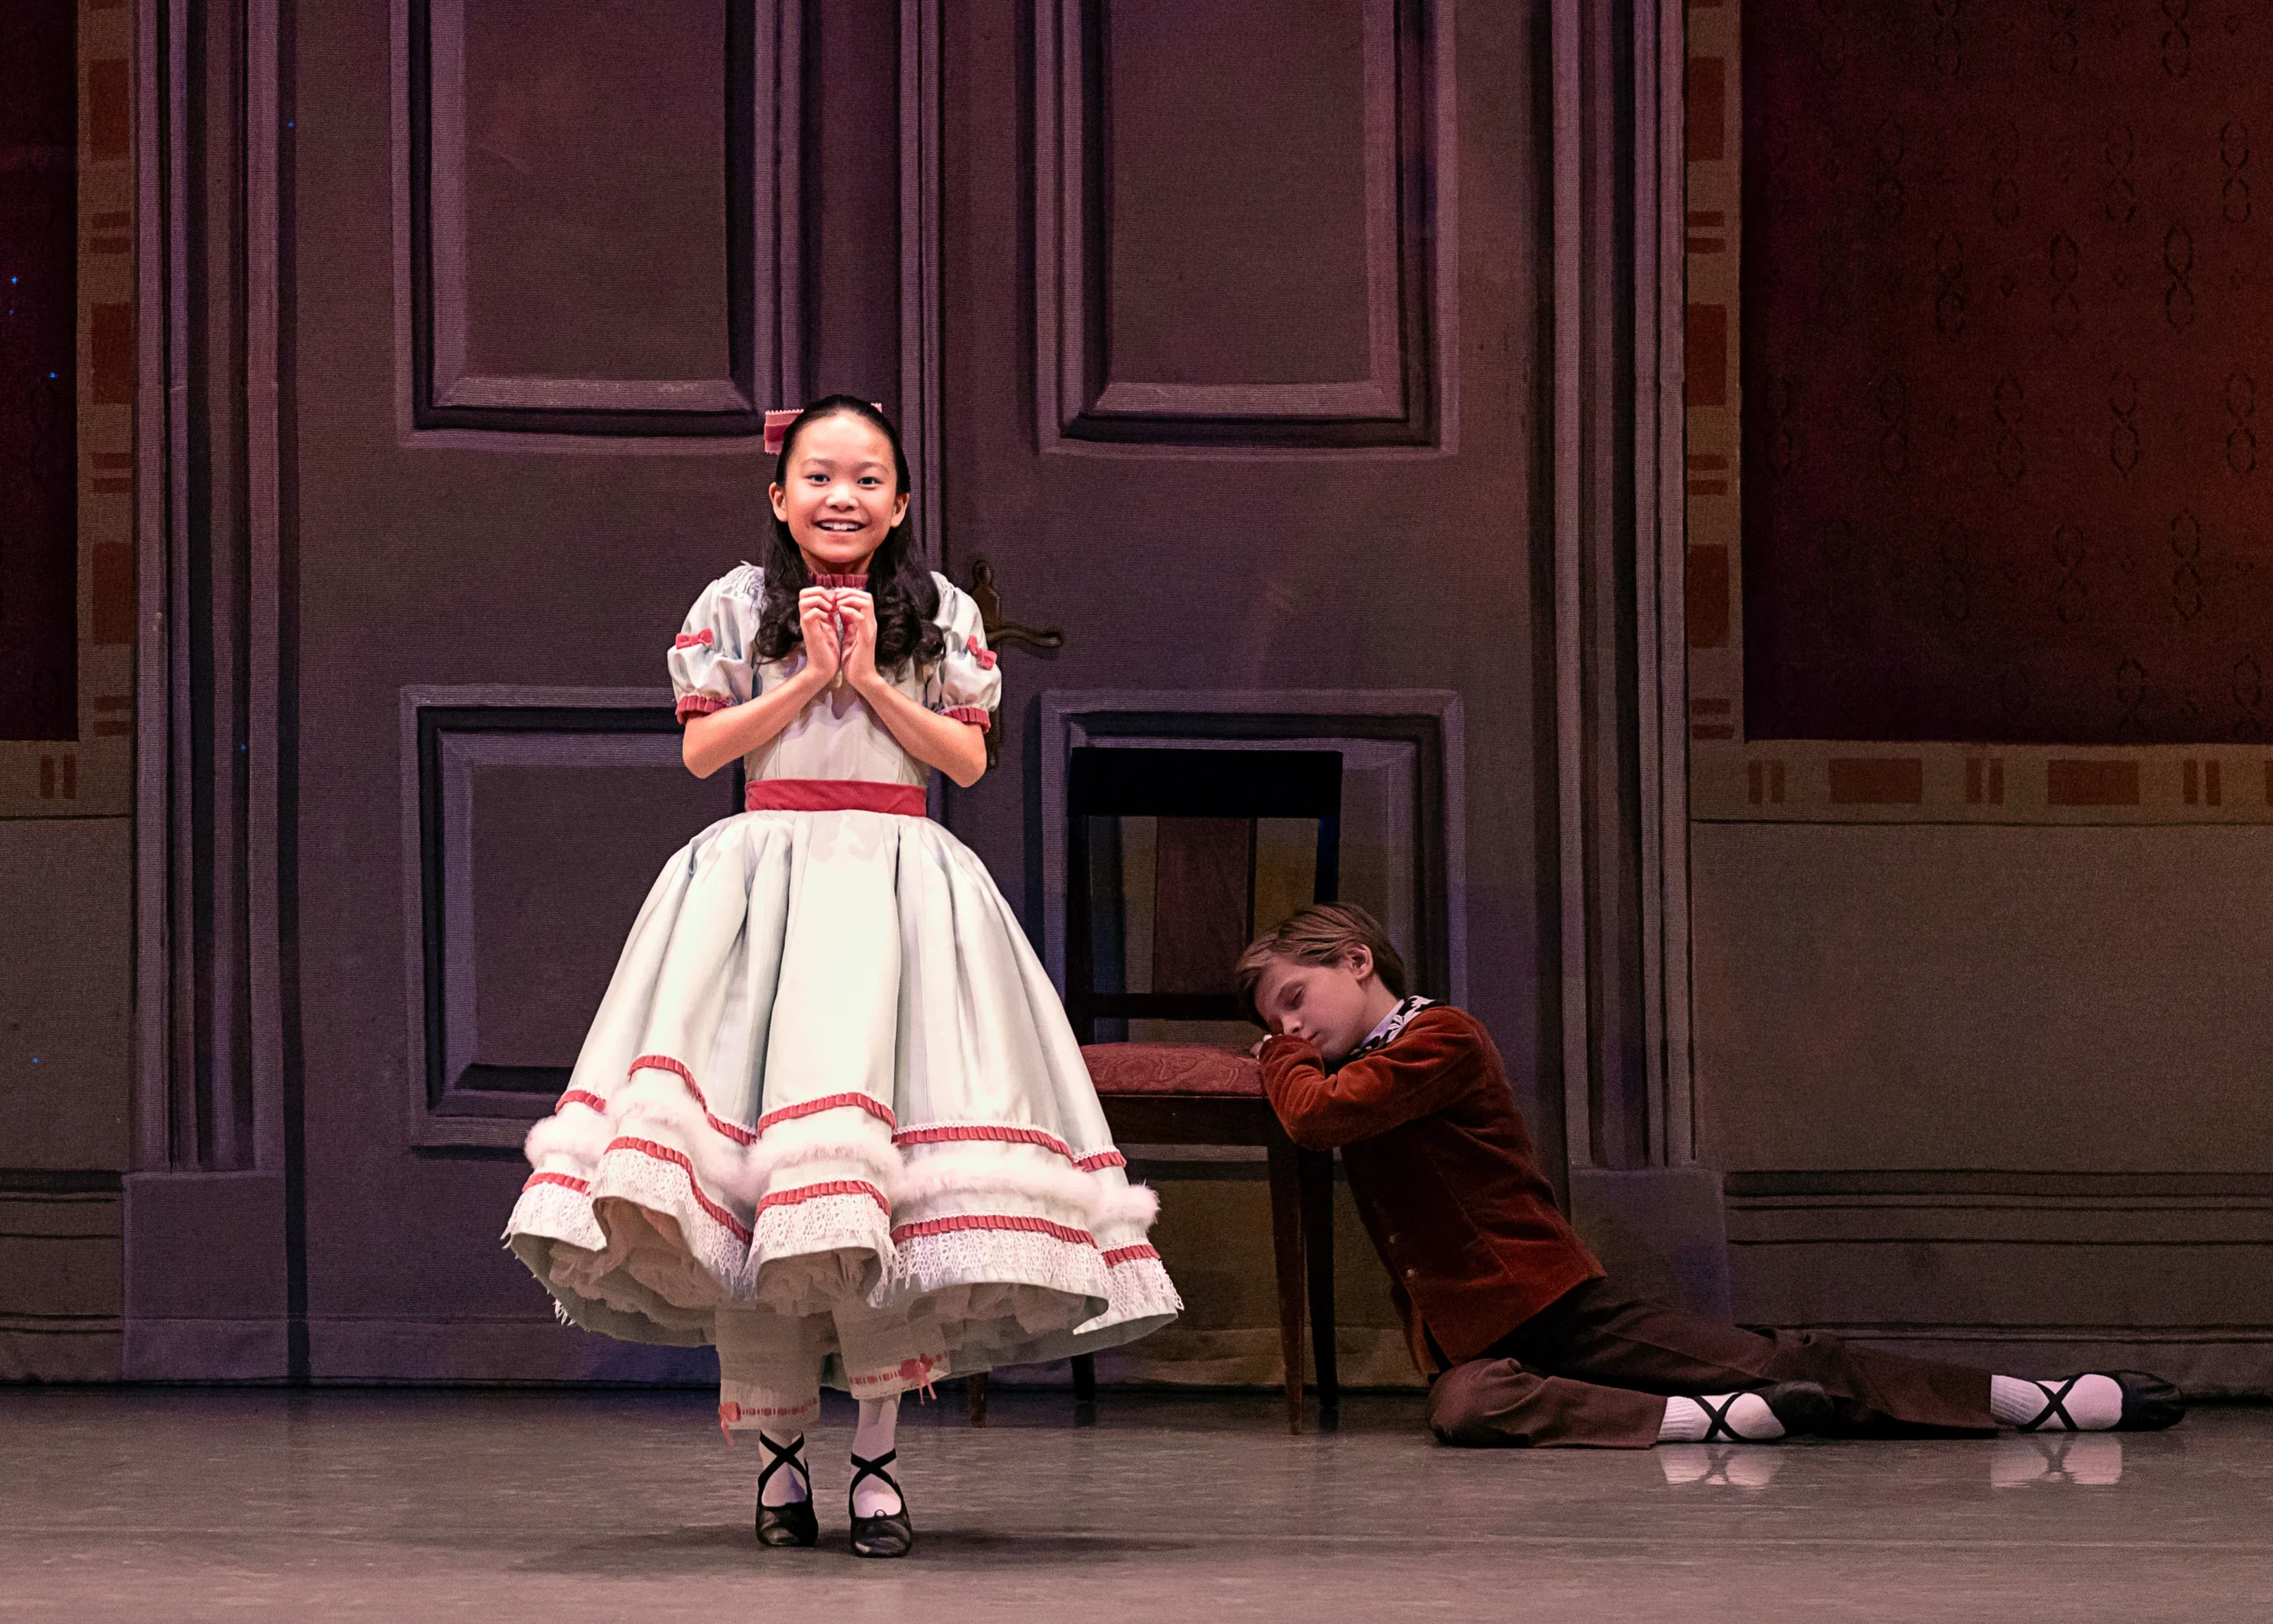 During a performance of The Nutcracker, a young dancer stands on her tiptoes and holds her hands together under her chin in excitement. She wears a long, full silver Victorian dress with a pink ribbon around the waist and pink trimmings around the skirt and puffed sleeves, and a big pink bow in her hair. Behind her, a young boy dancer sits on the floor with his legs out to his left and rests his head on his hands on the seat of a chair, napping. They poses in front of a giant parlor door.